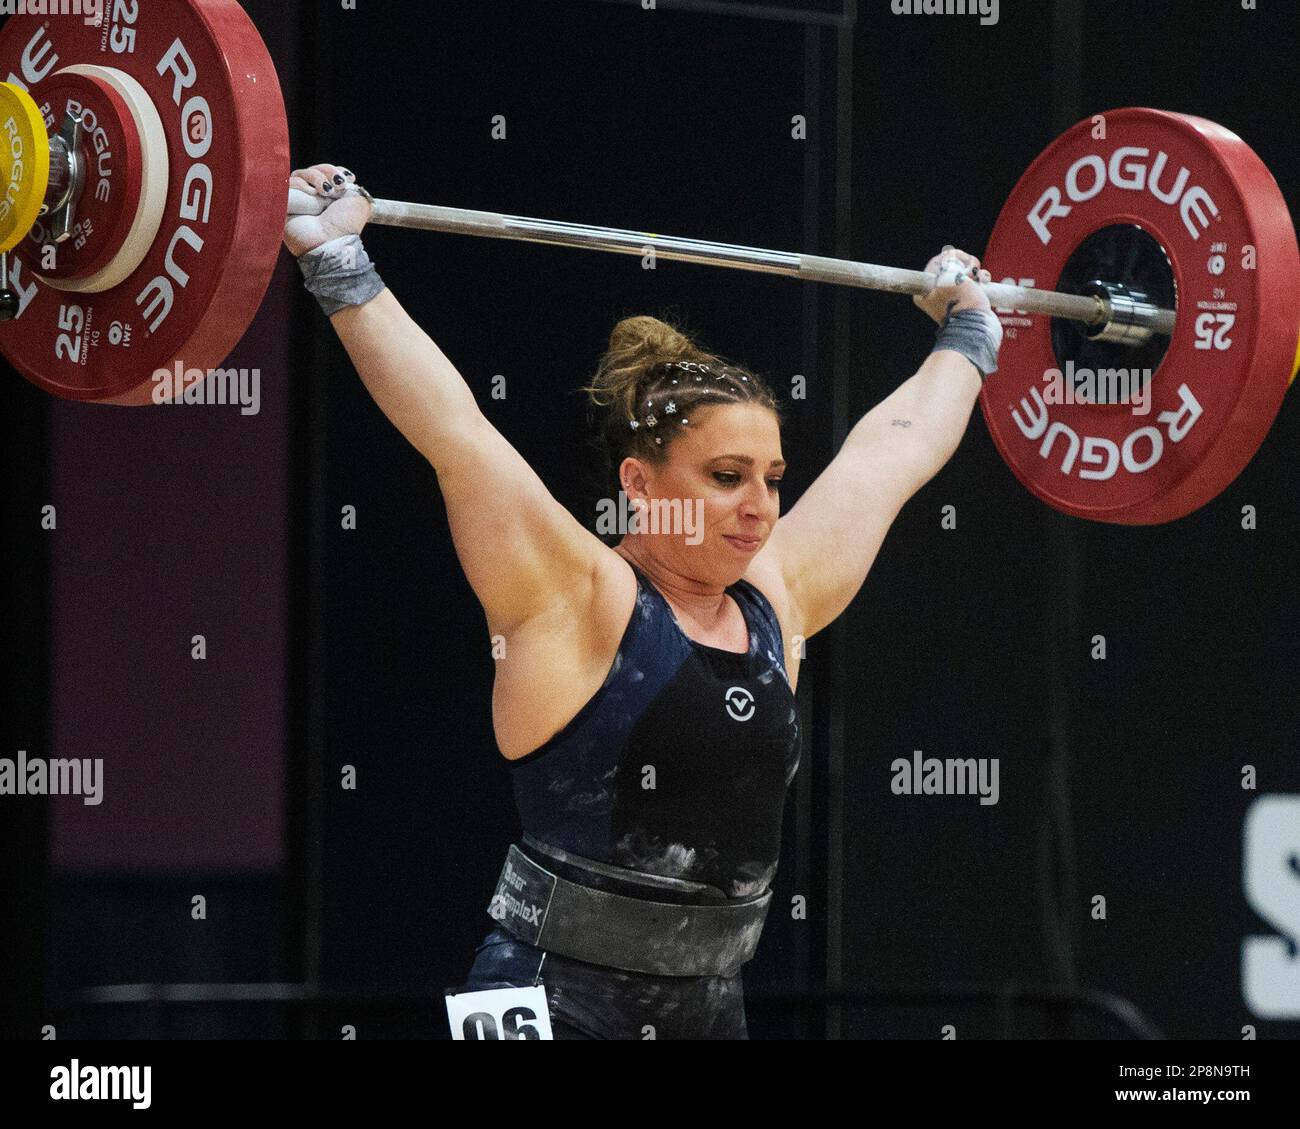 Columbus, Ohio, United States. 3th Mar, 2023. Shelby Pflug competes in the snatch in the Women's 64kg category at the Rogue Stage in Columbus, Ohio, USA. Credit: Brent Clark/Alamy Live News Stock Photo